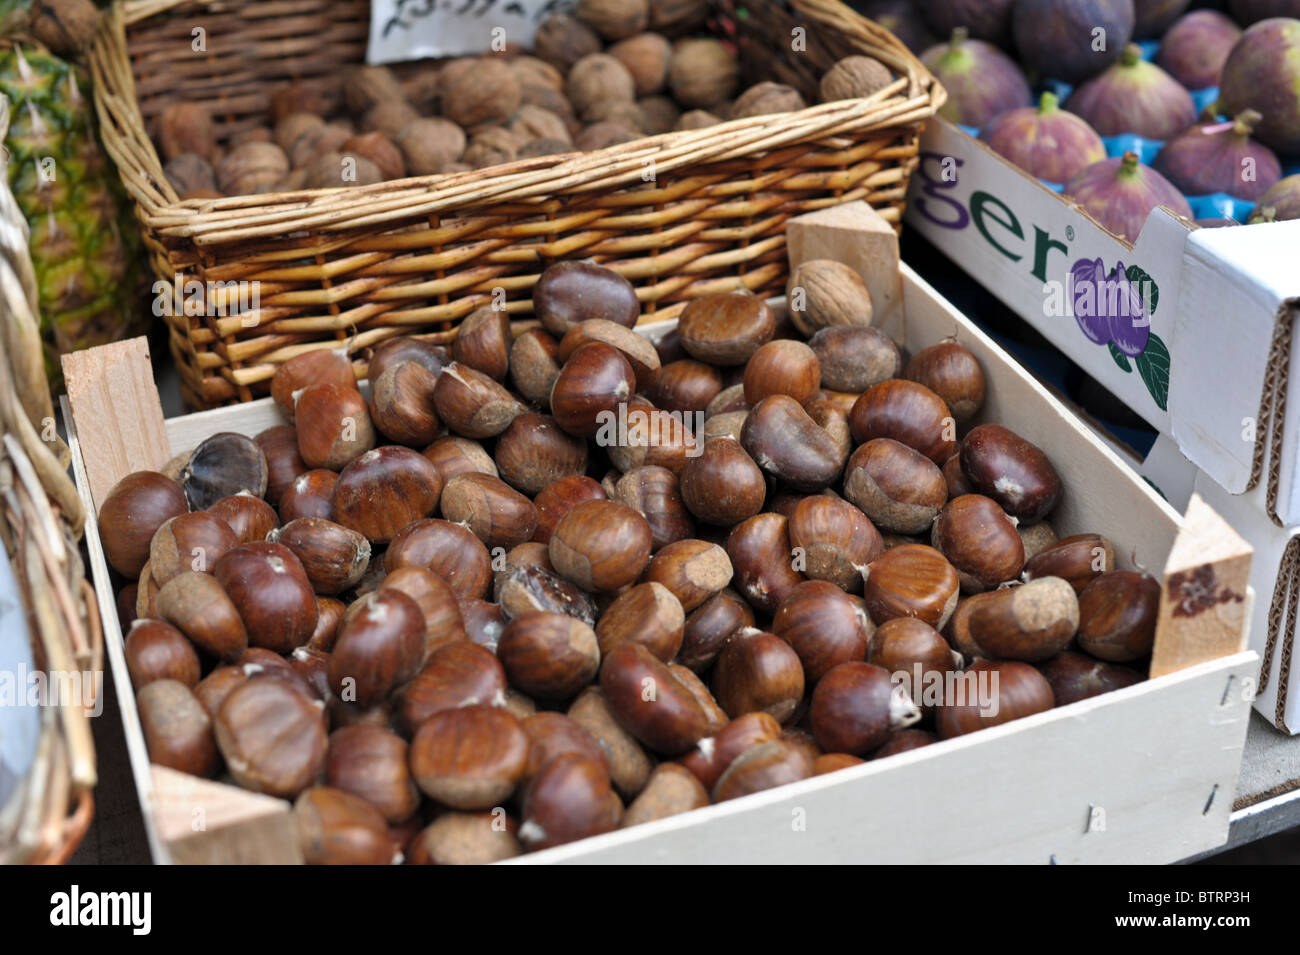 A box piled up with chestnuts ready for roasting on an open fire, a box of luxury figs and a basket of walnuts on a market stall Stock Photo